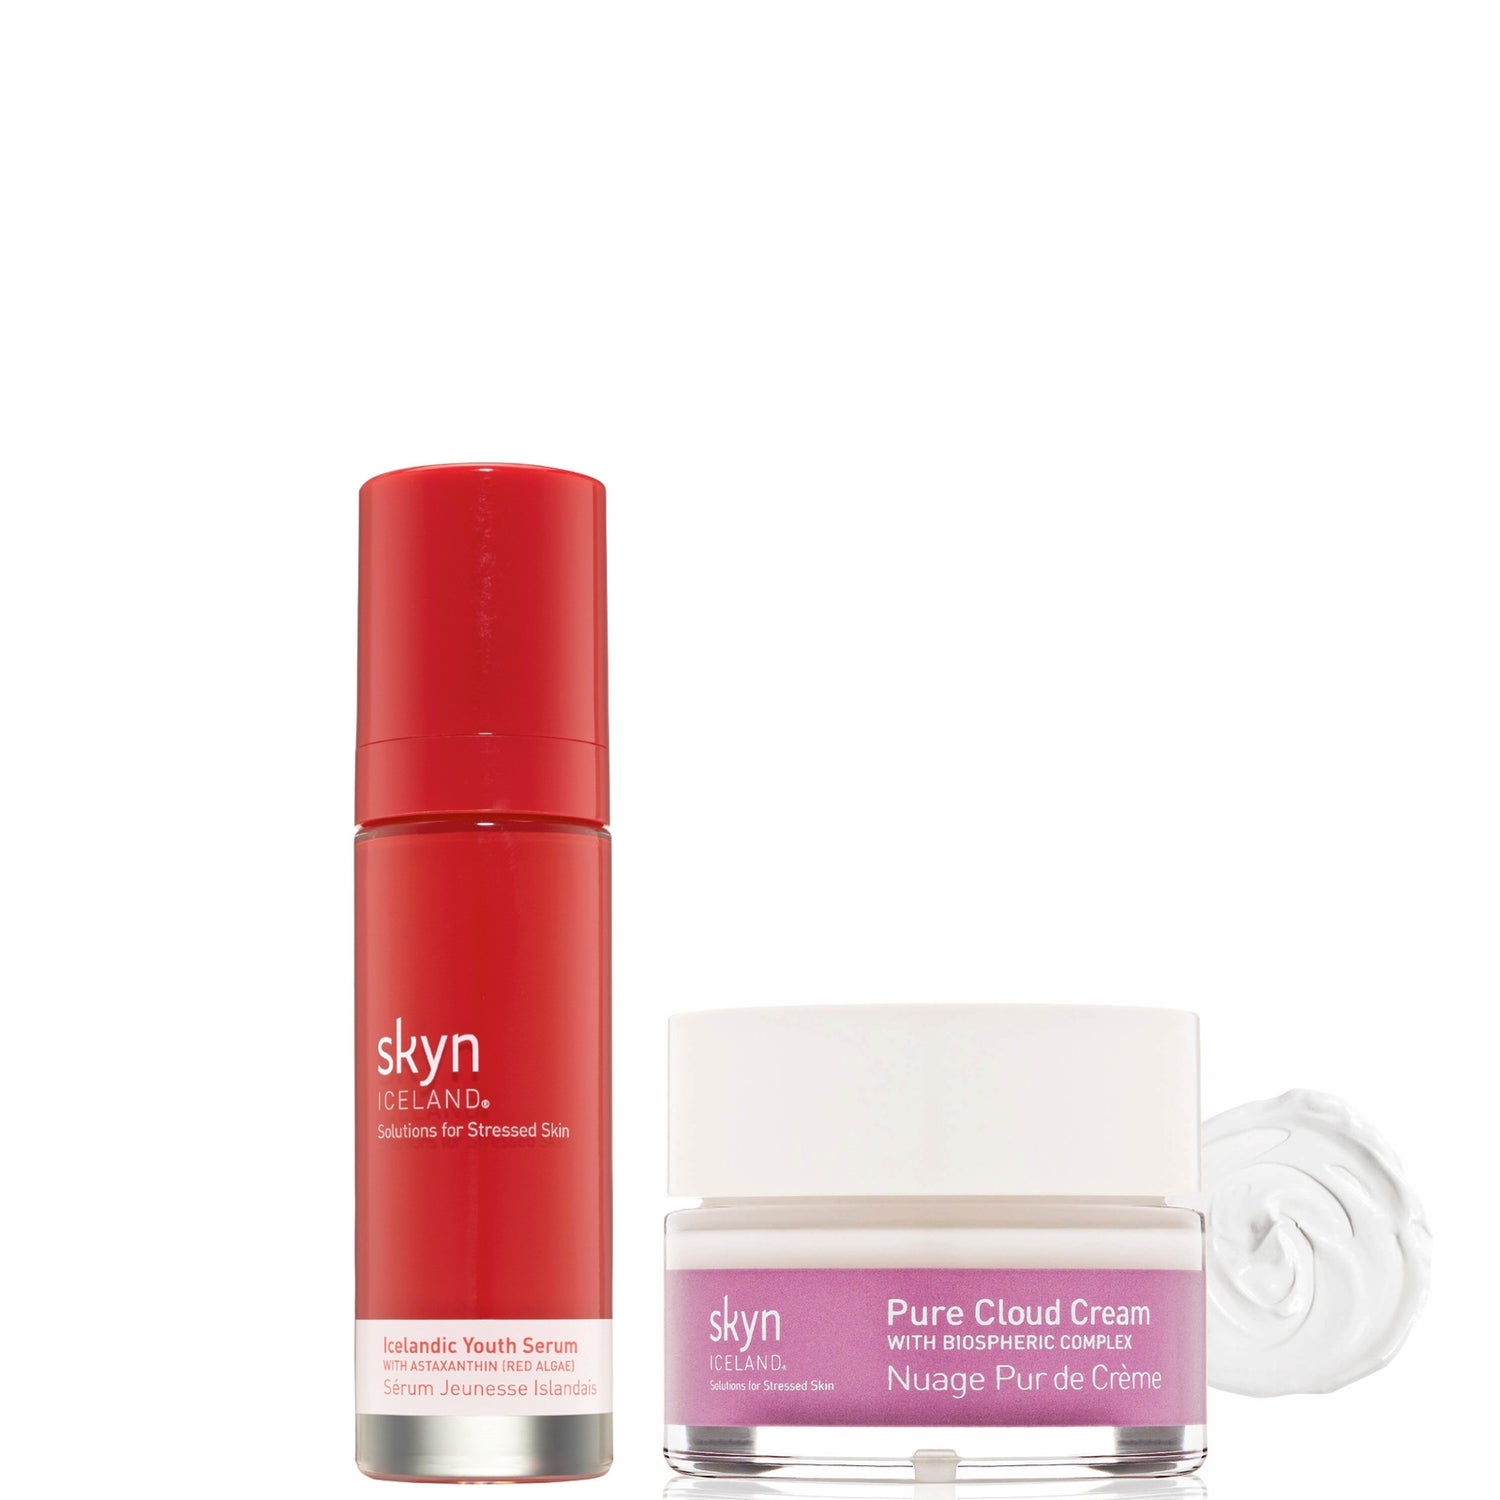 skyn ICELAND Face Duo (Worth $88.00)